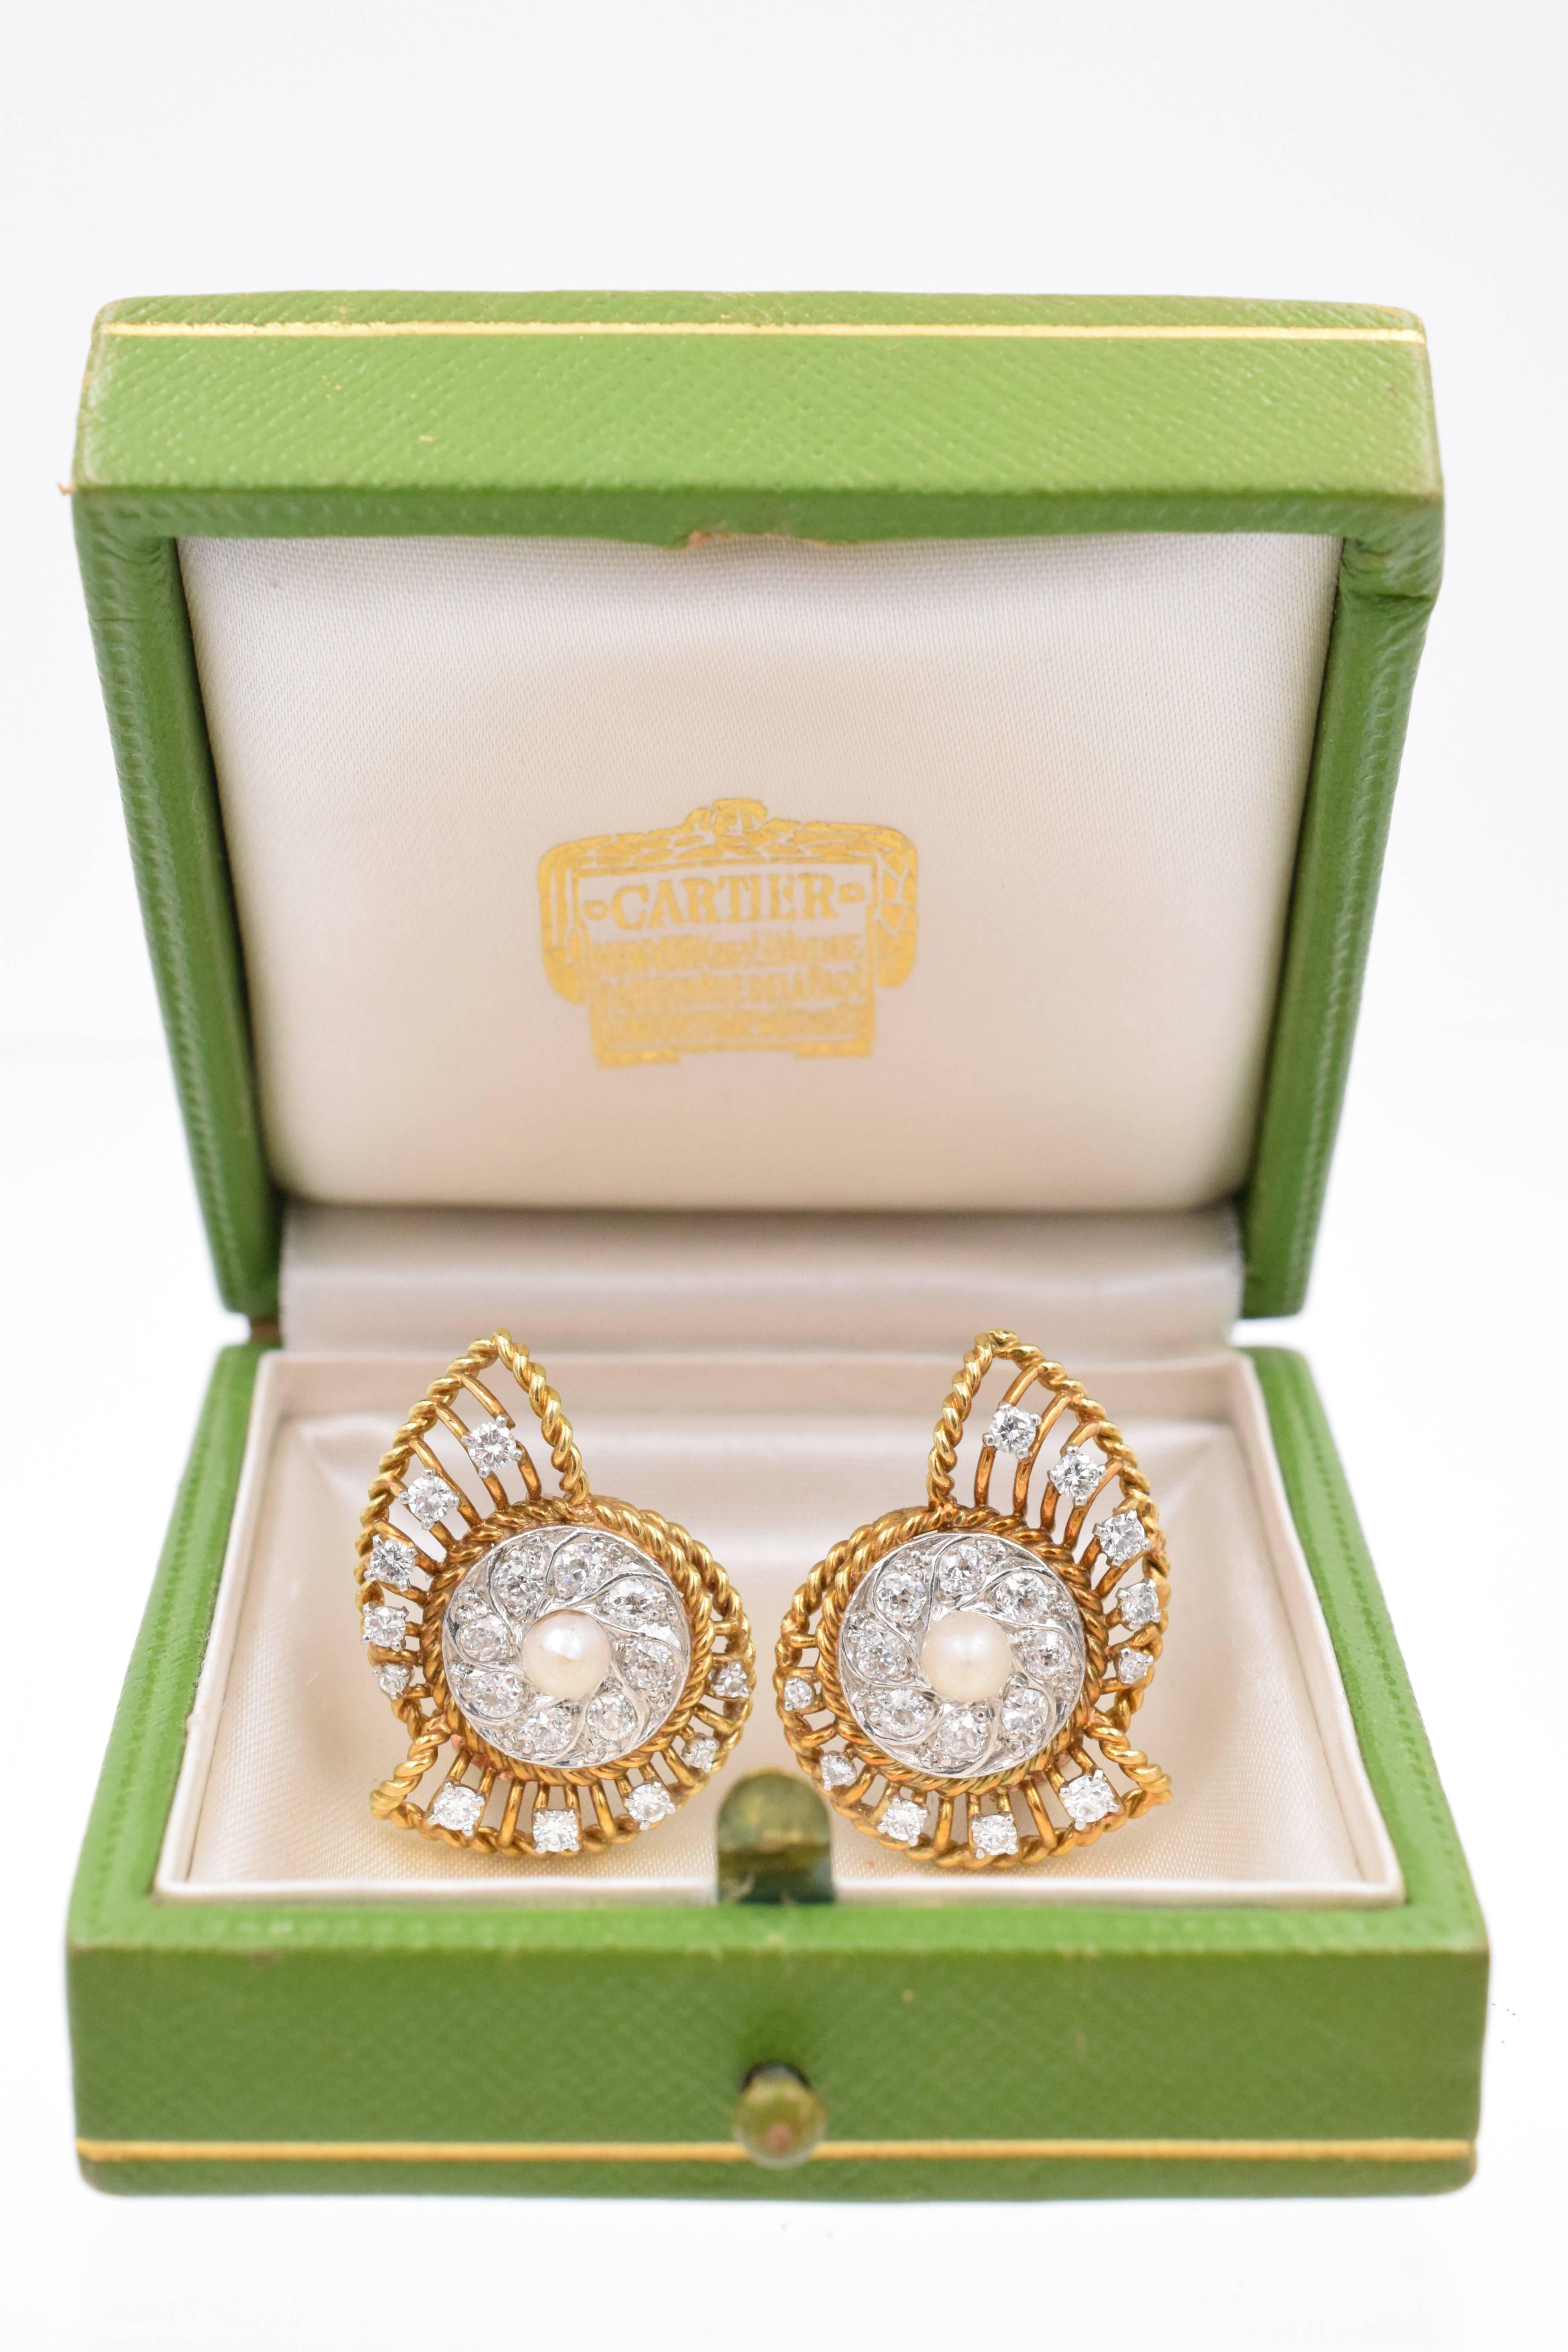 Cartier! Vintage ear clips with nautilis motif & incorporating central platinum plaques,with 36 old European diamonds & 2 pearls.
Pearls measurement is: 4.63mm
18k gold and platinum
Signed: Cartier